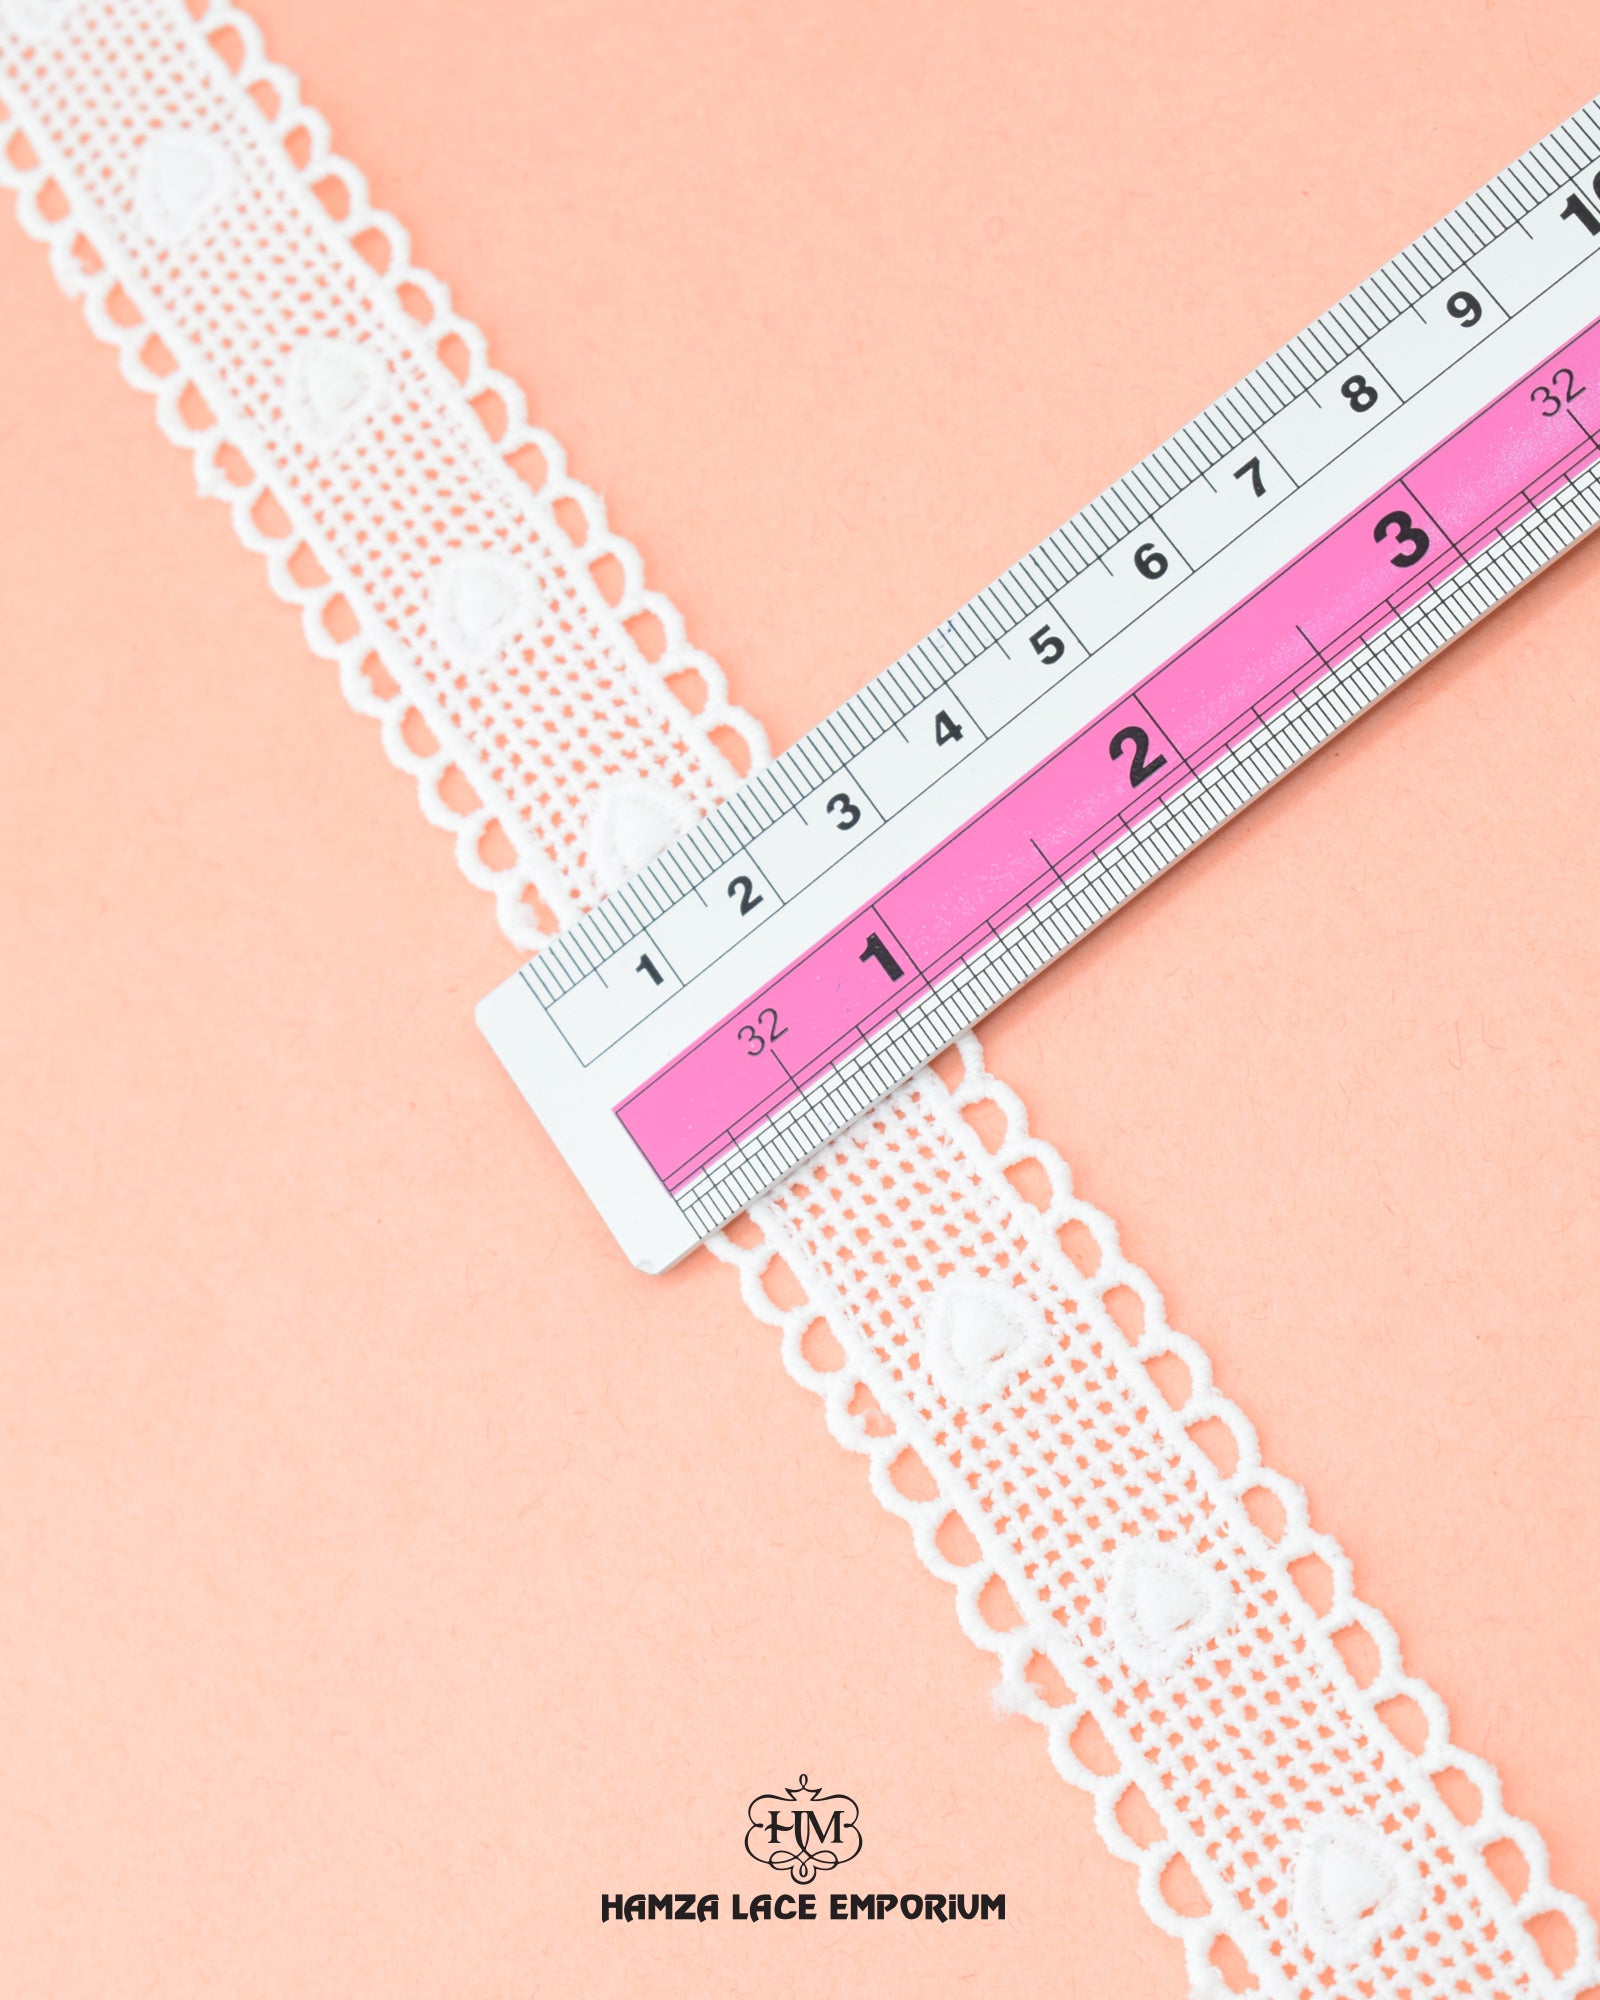 Size of the 'Center Filling Lace 16087' is shown as '1' inch with the help of a ruler